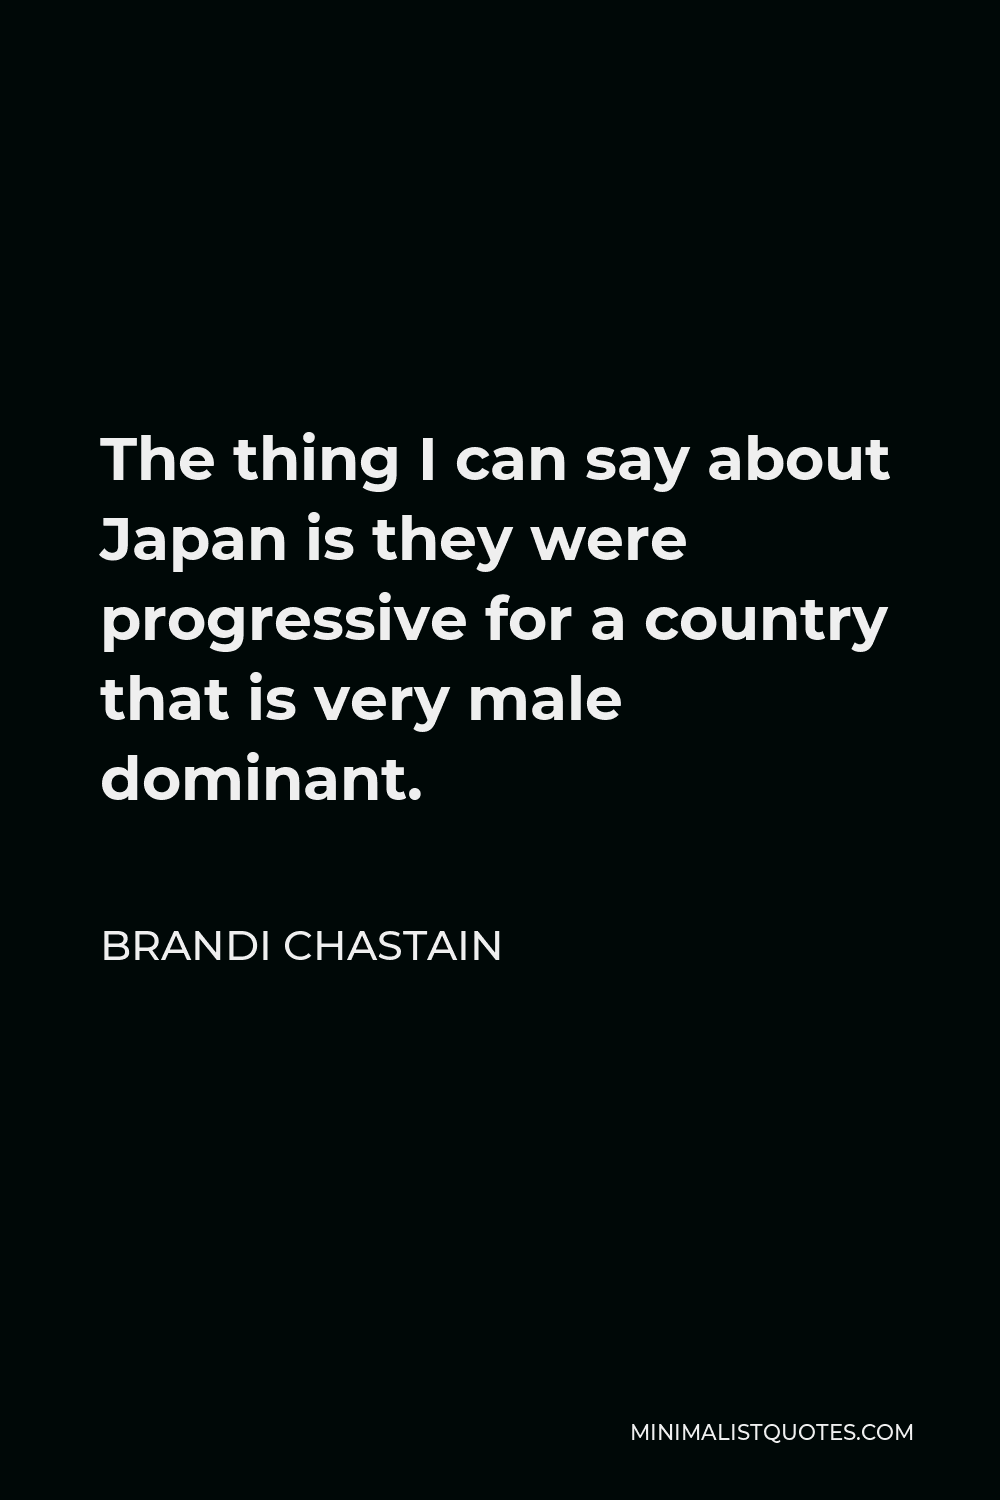 Brandi Chastain Quote - The thing I can say about Japan is they were progressive for a country that is very male dominant.